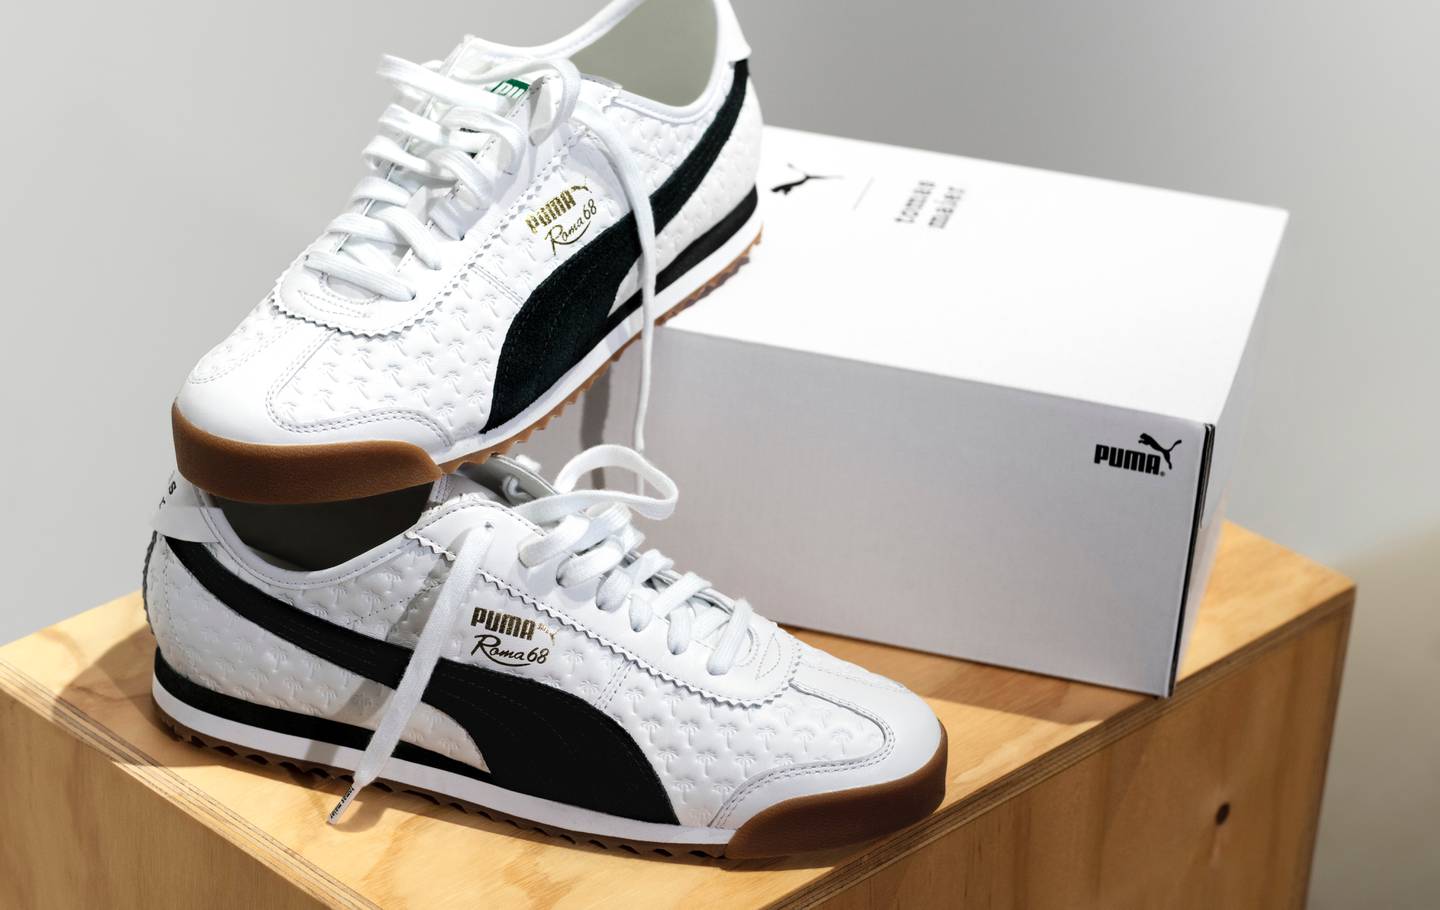 Kering to Reduce Puma Stake Further With $1 Billion Sale | BoF